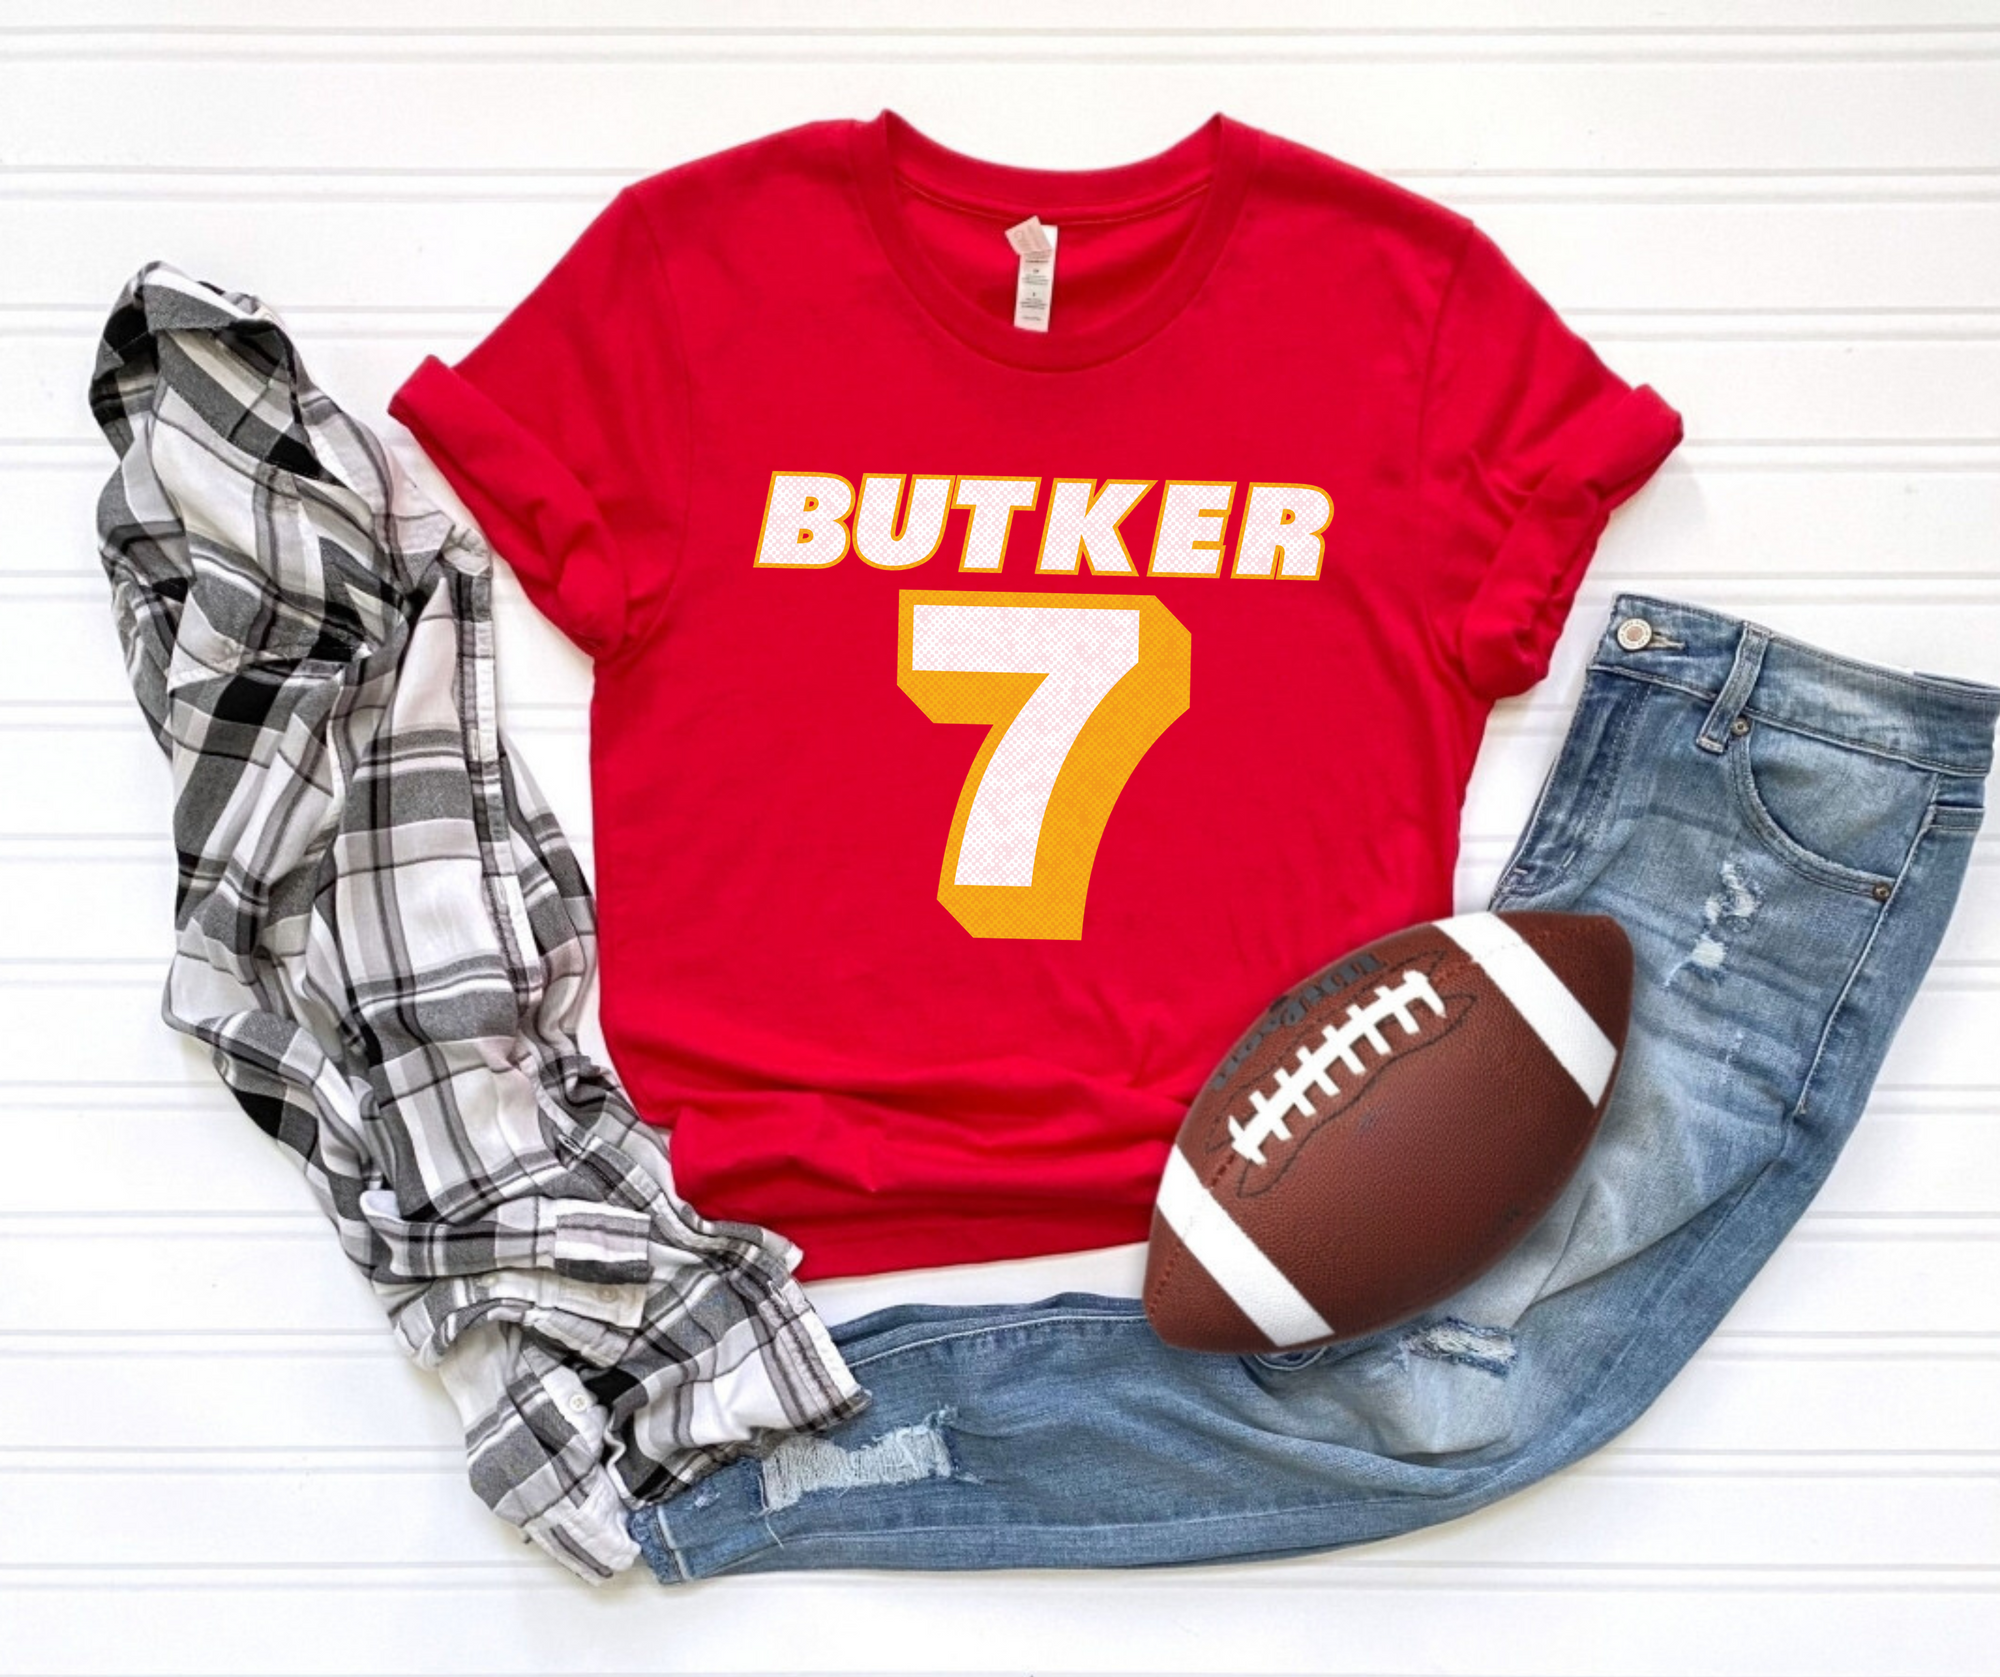 Butker #7 Red Tee - The Red Rival